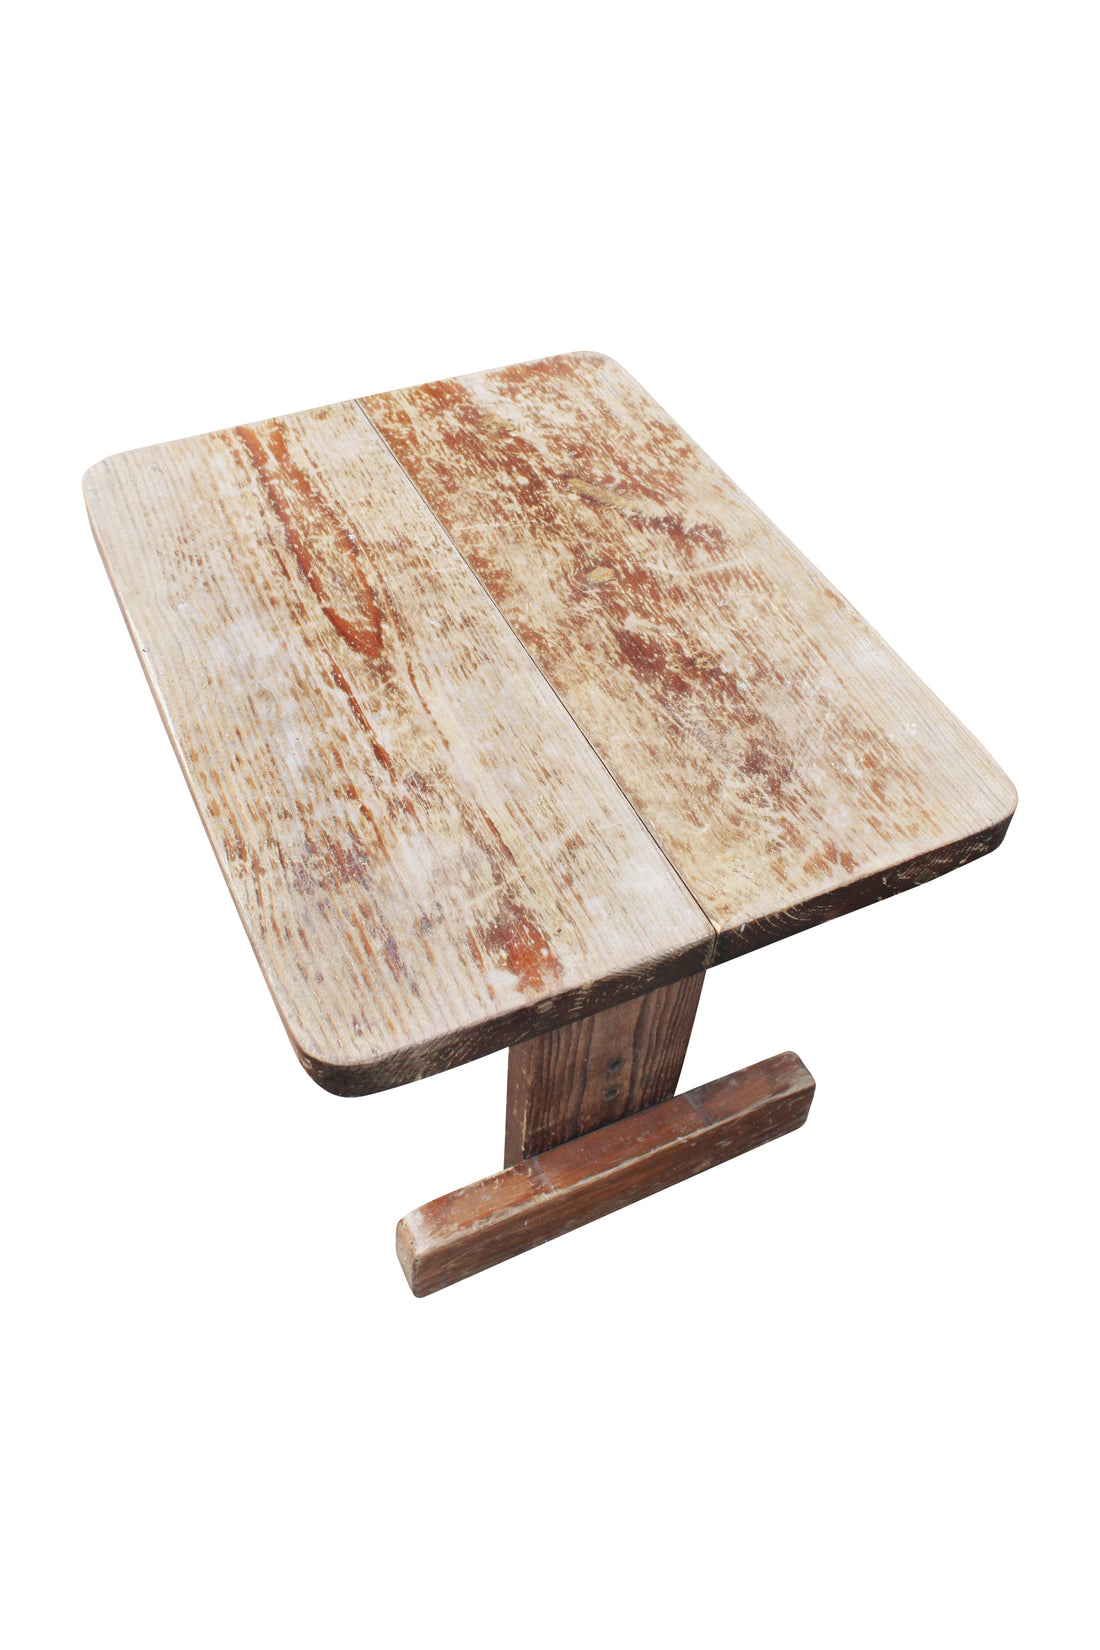 Rustic Side Table